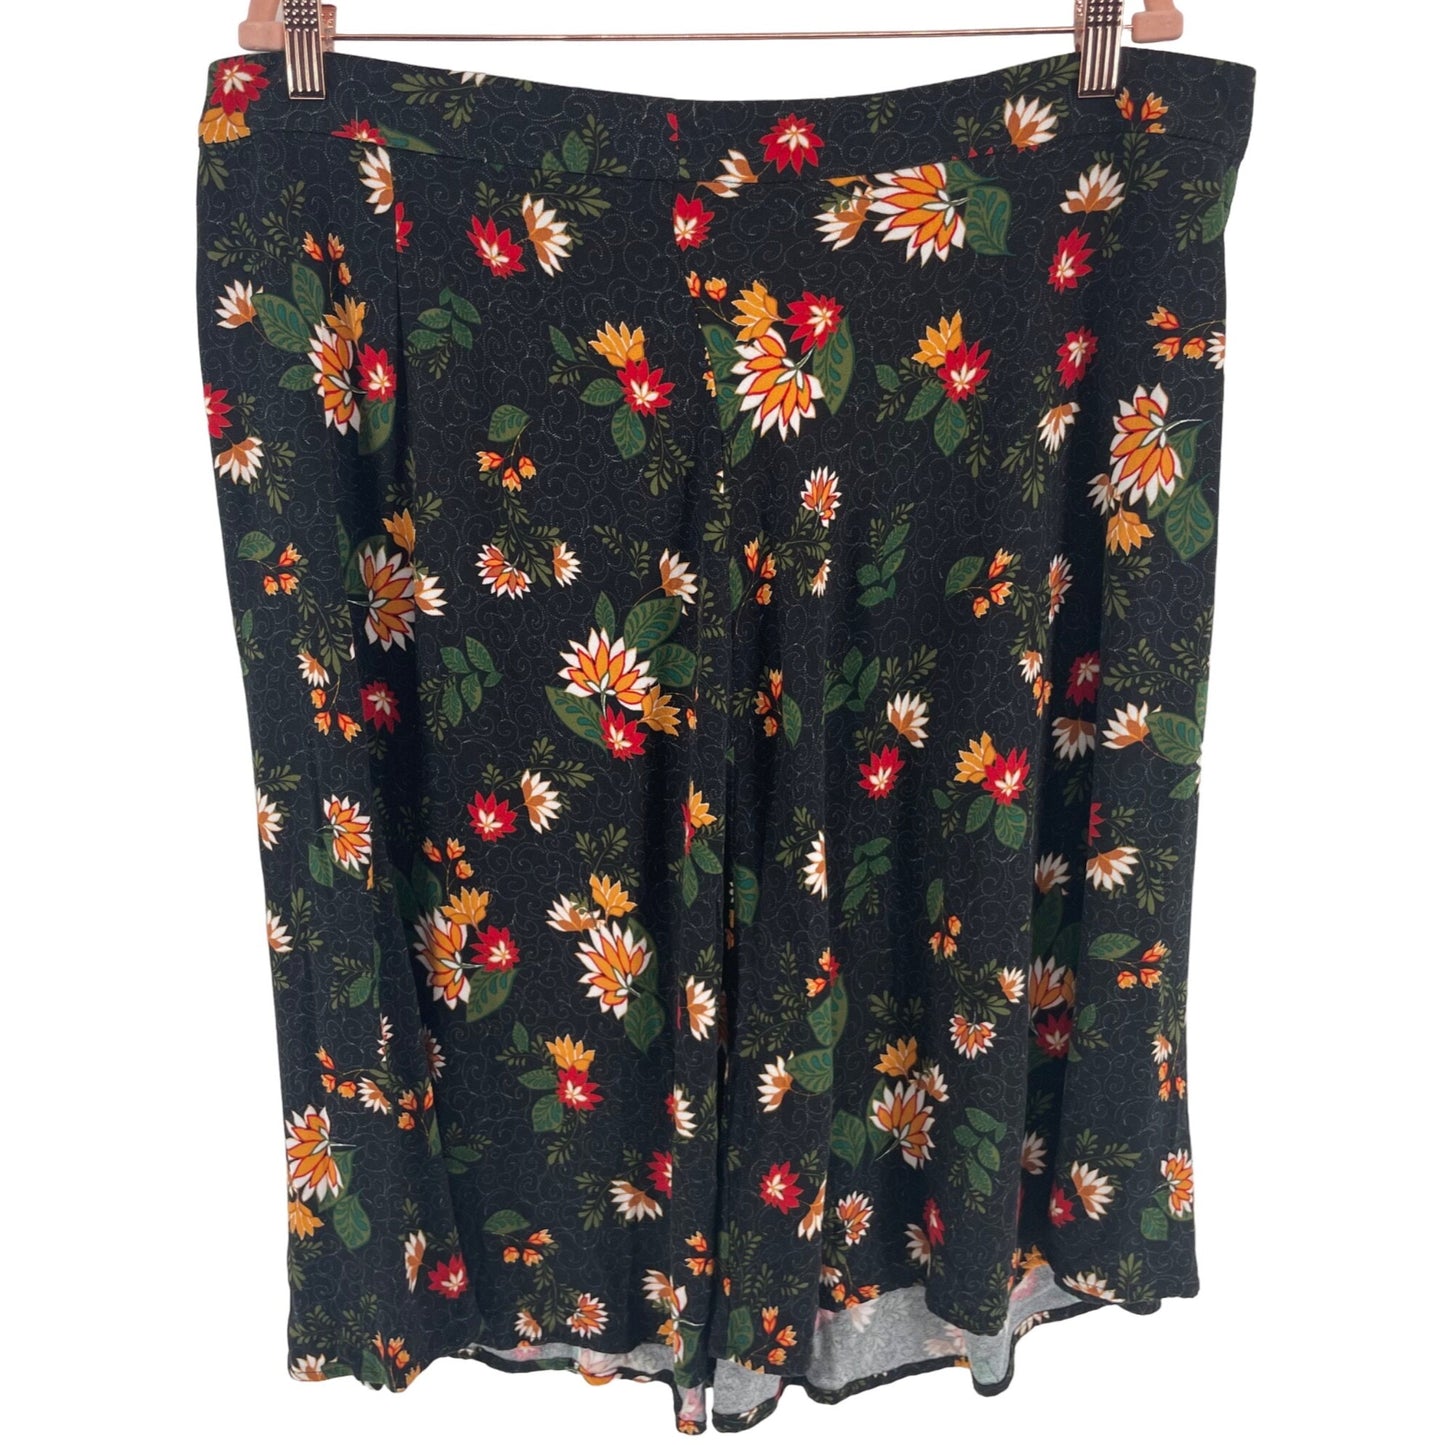 Just Fab Women's Size 2X Black/Multi-Colored Floral A-Line Skirt